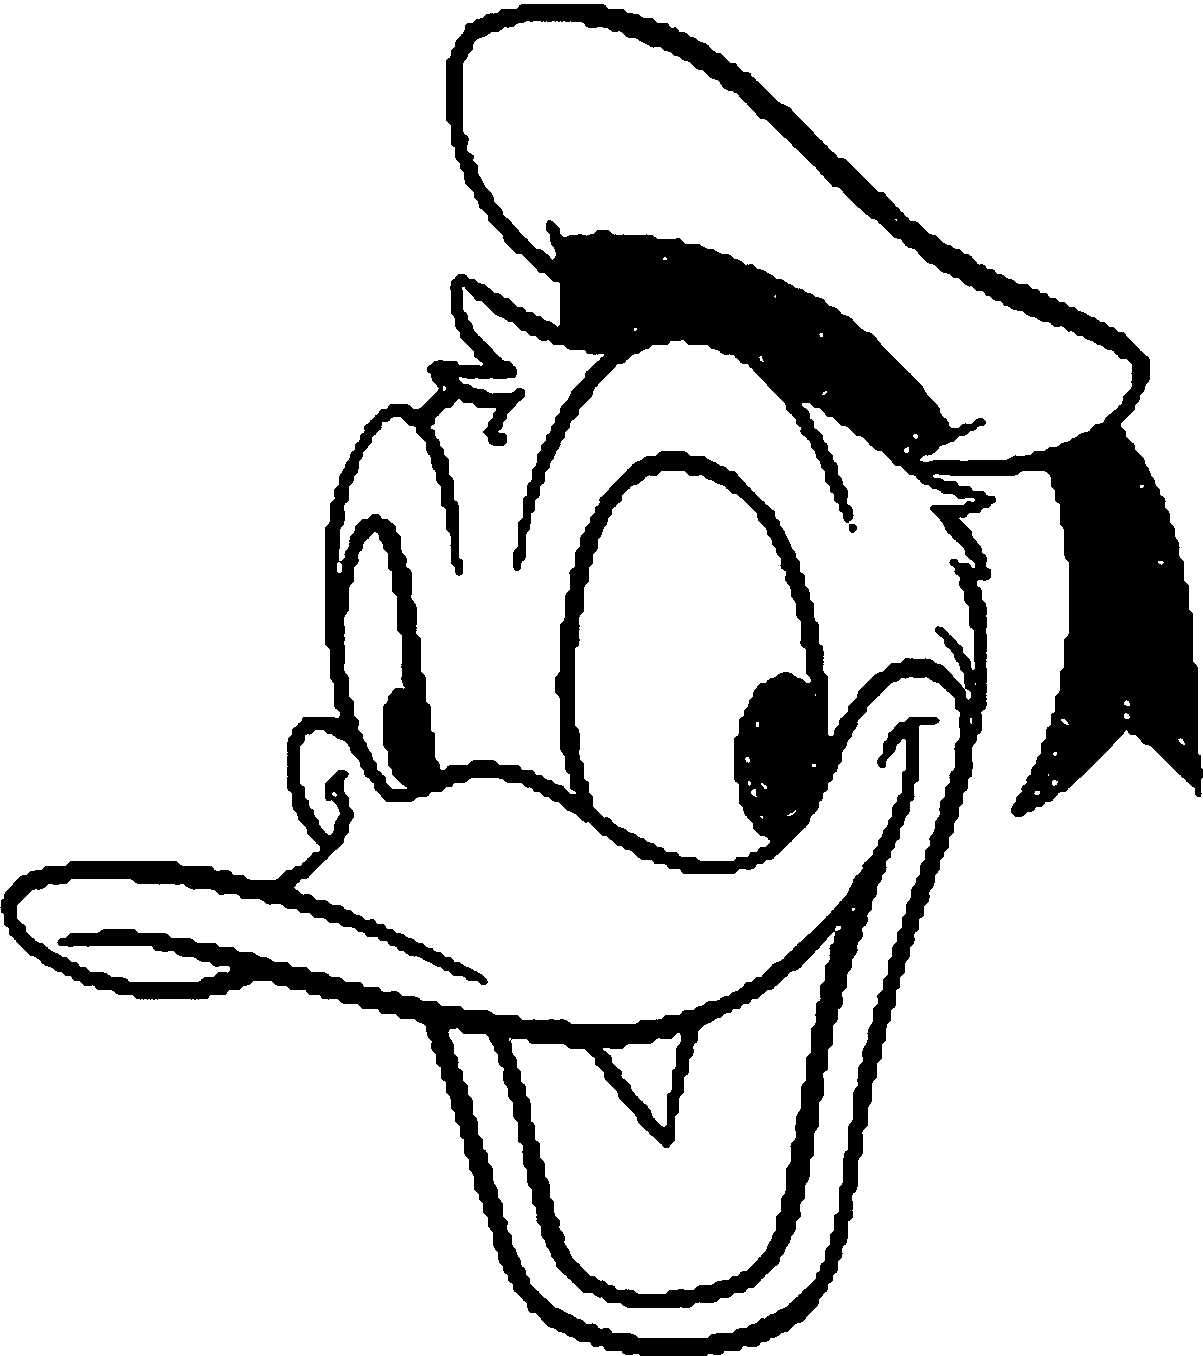 Donald Duck Coloring Page